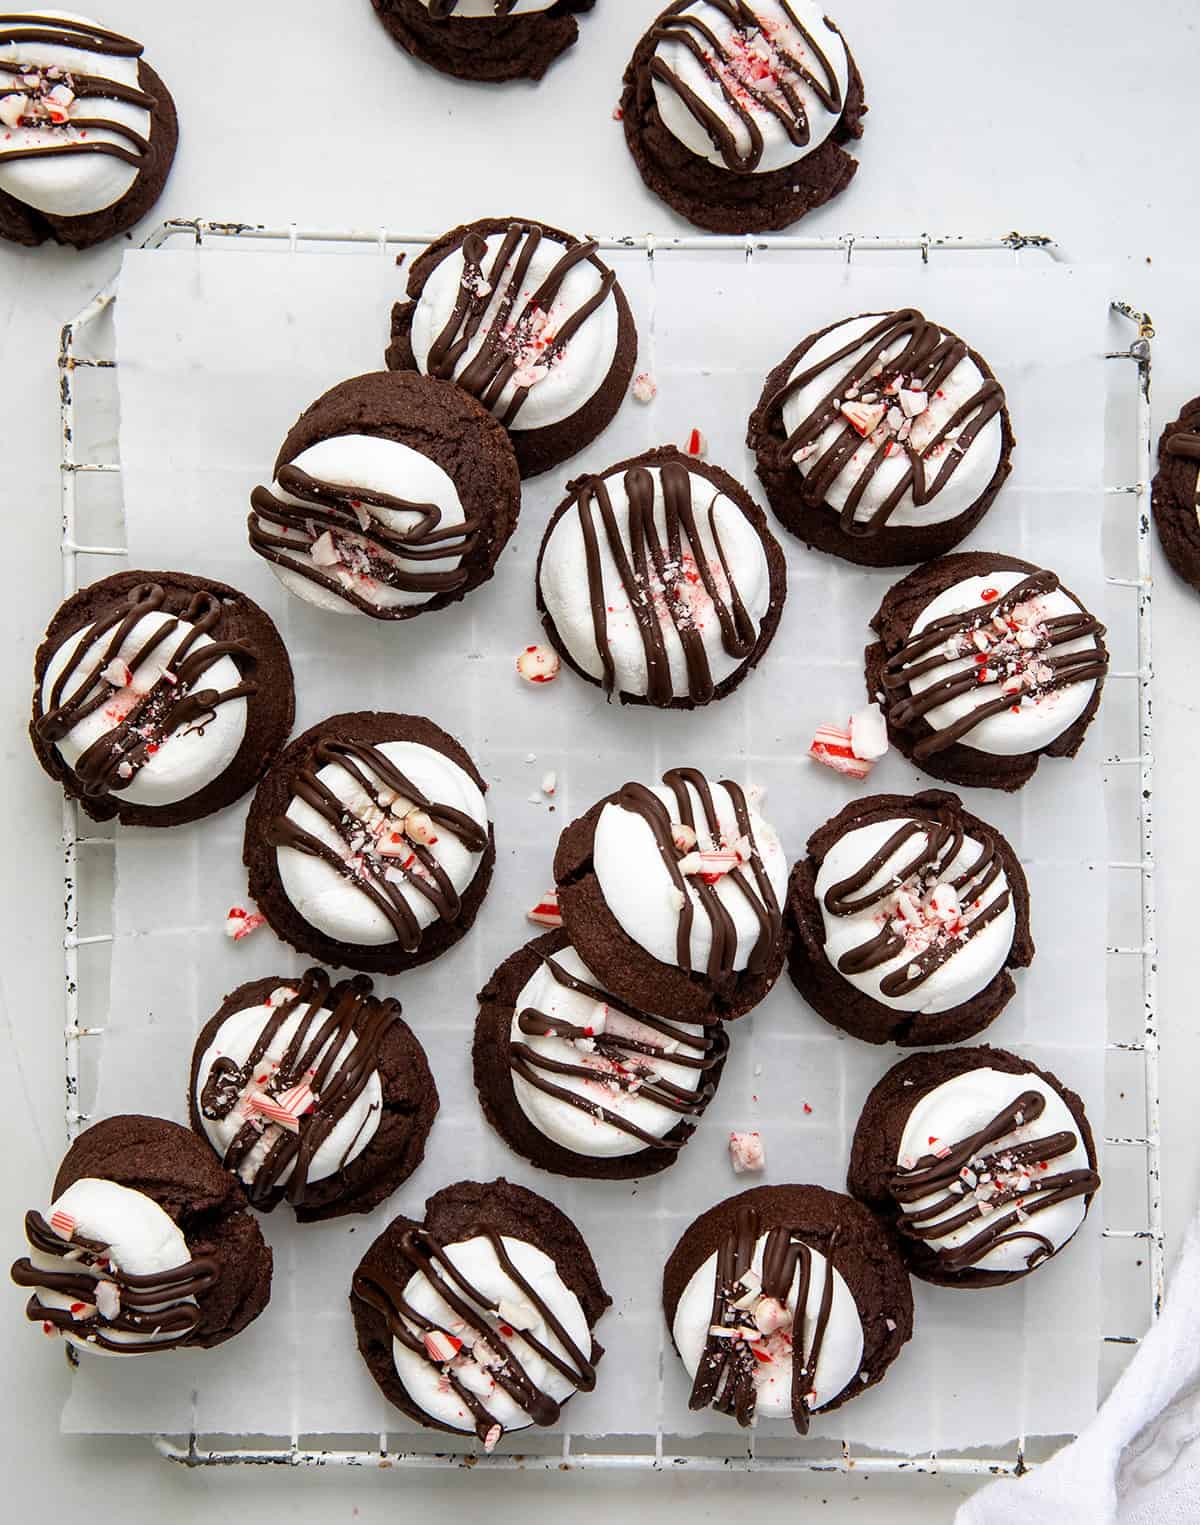 Peppermint Hot Chocolate Cookies on a cooling rack covered in white parchment paper with pieces of candy canes around from overhead.